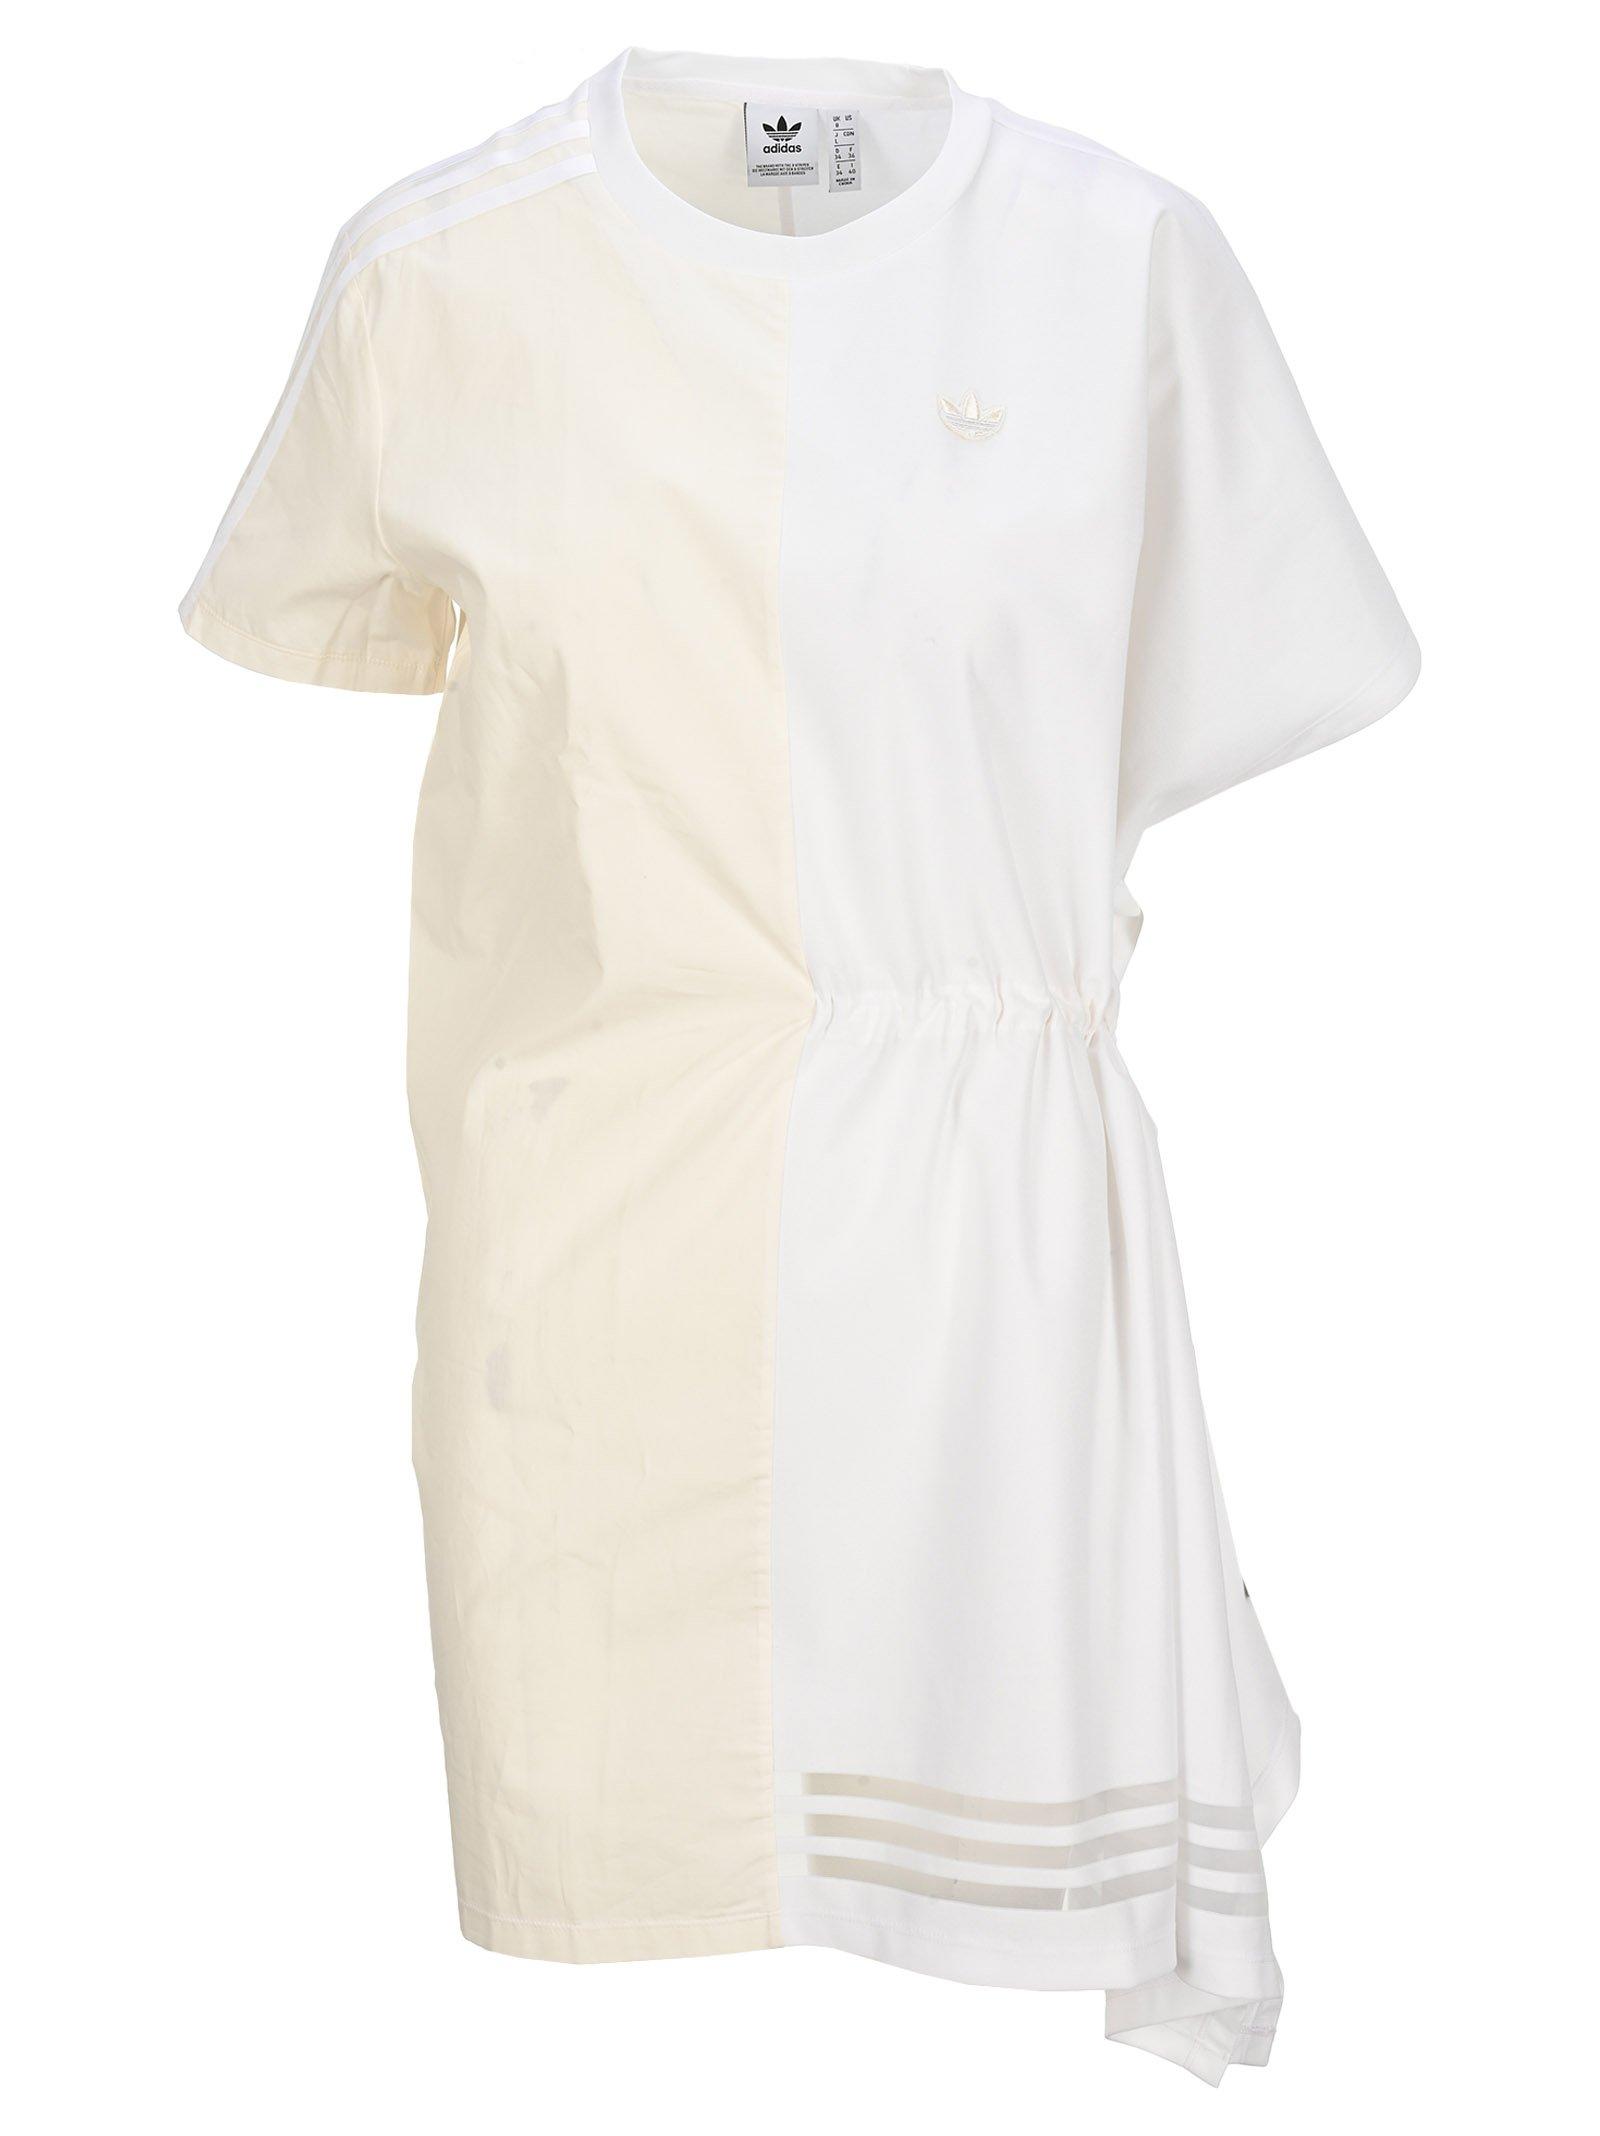 adidas Originals Synthetic Asymmetric T-shirt Dress in White - Lyst